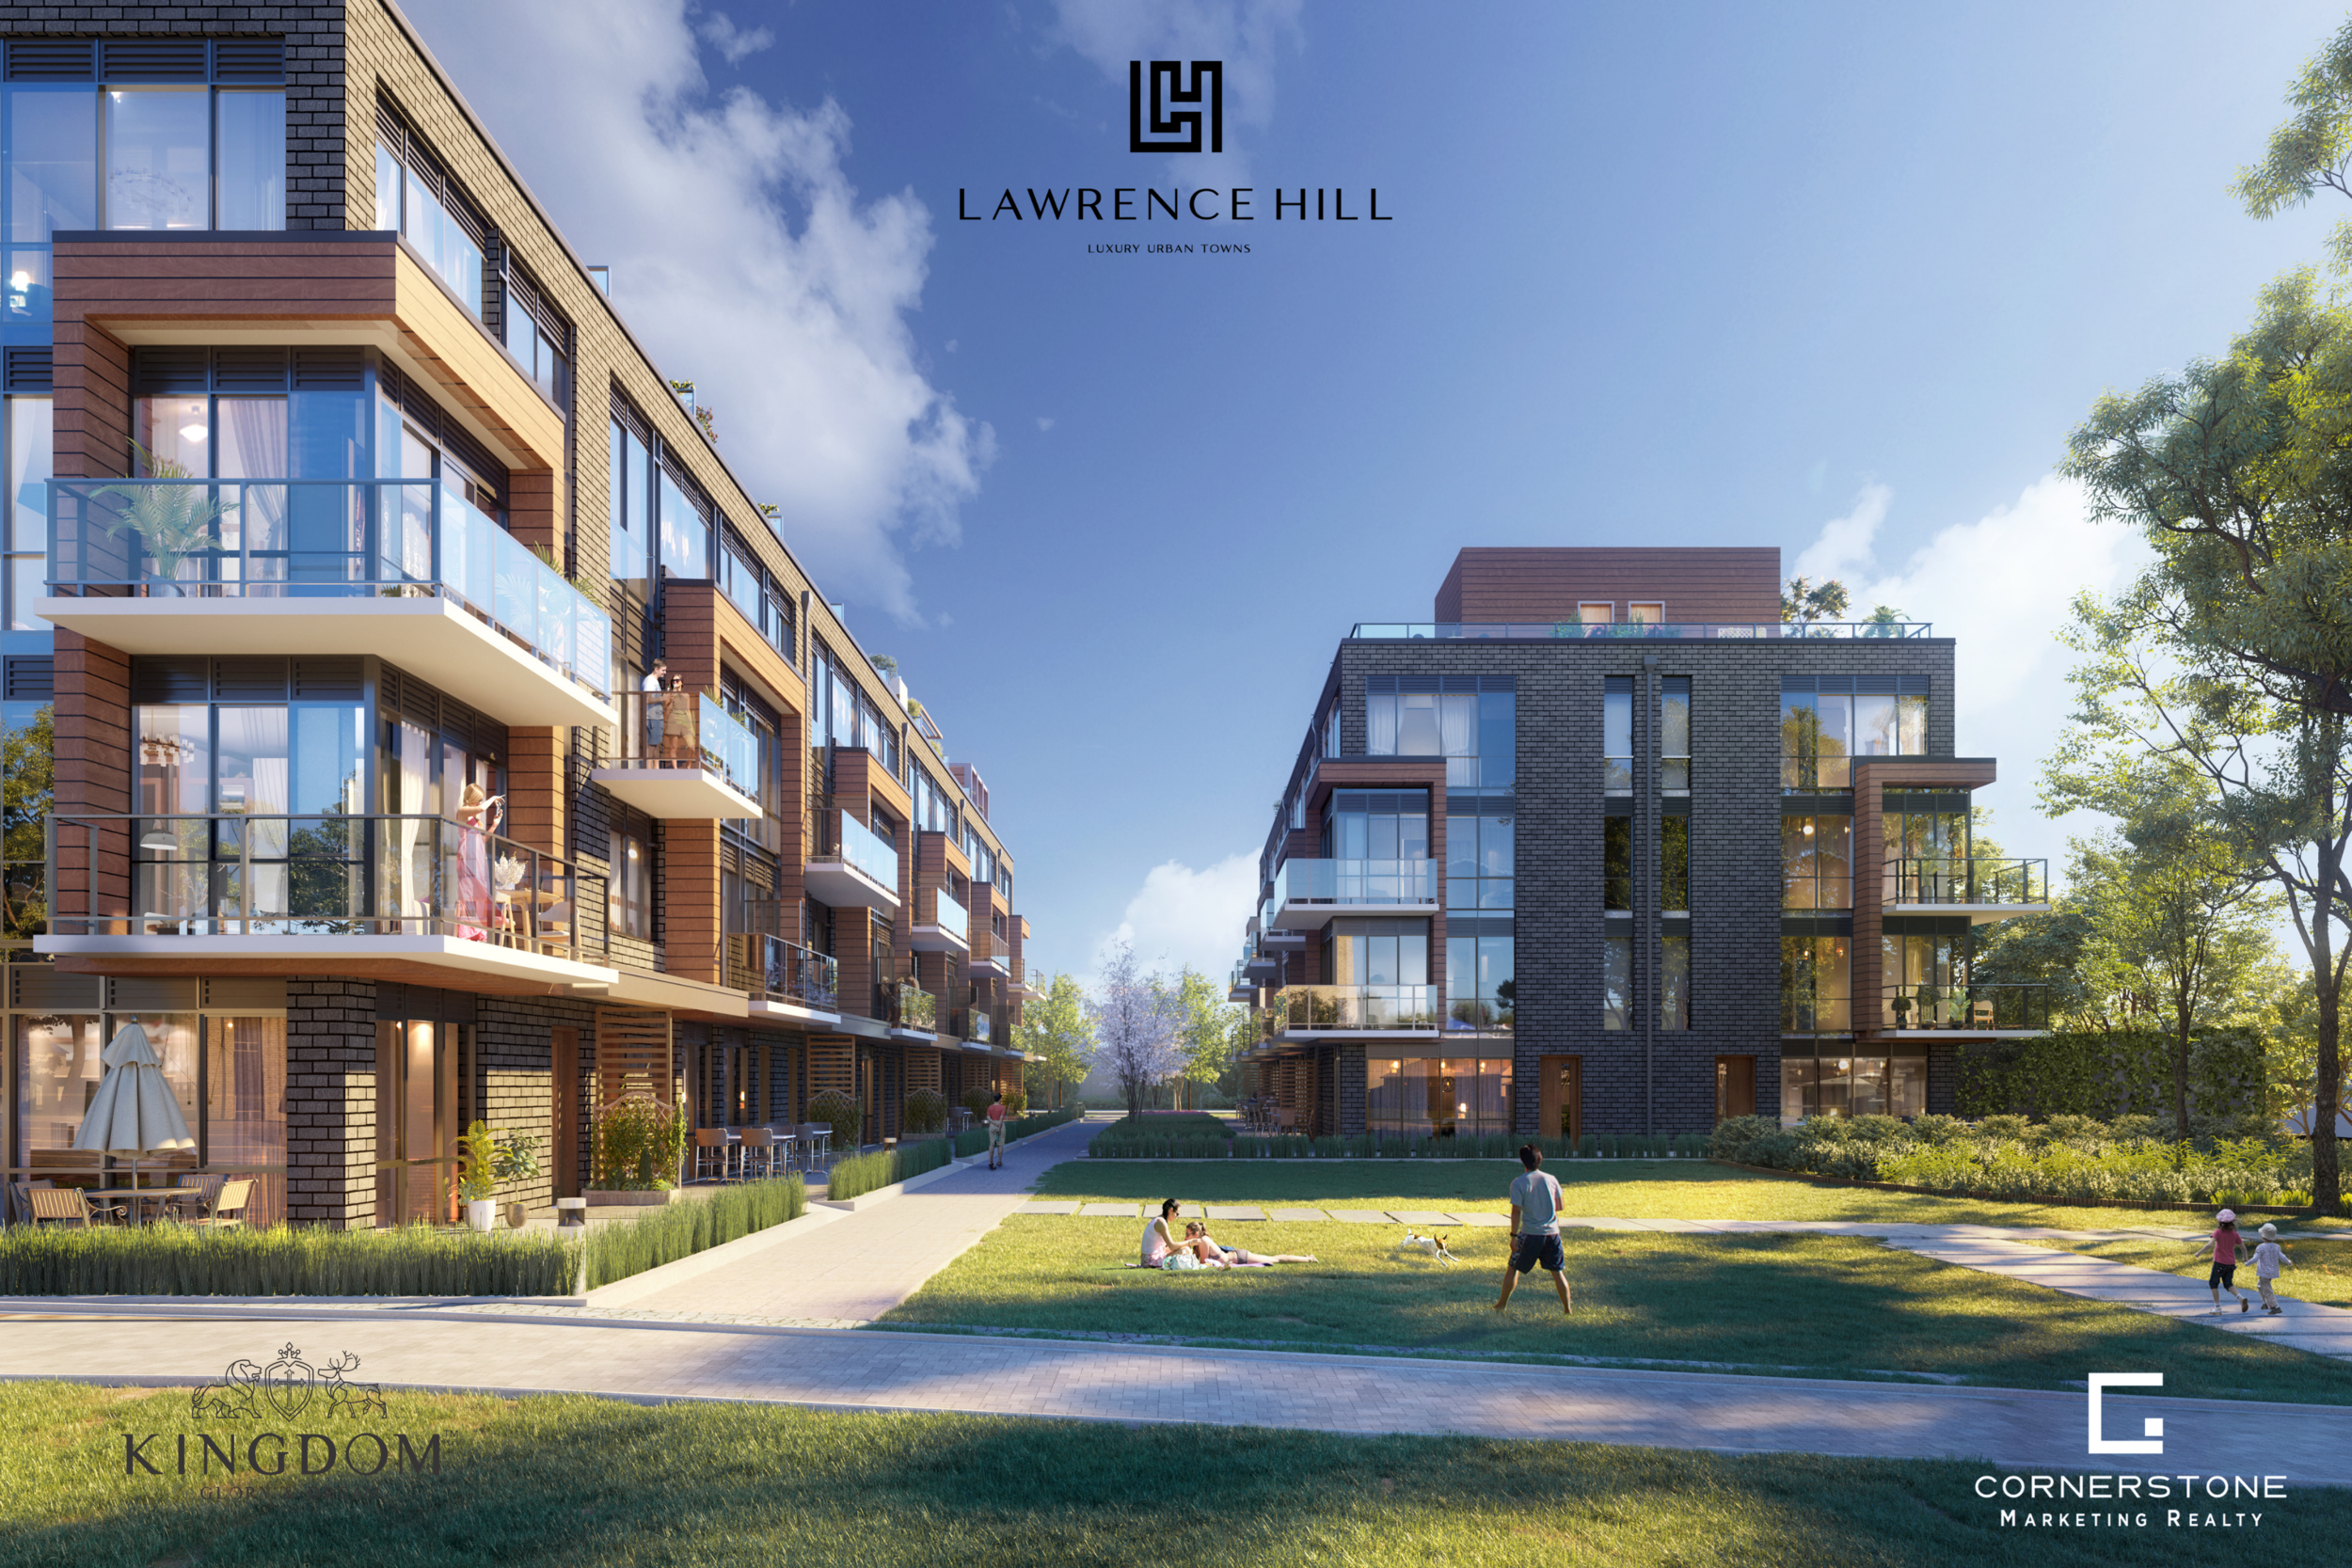 Lawrence Hill Luxury Urban Towns - Park Rendering.png